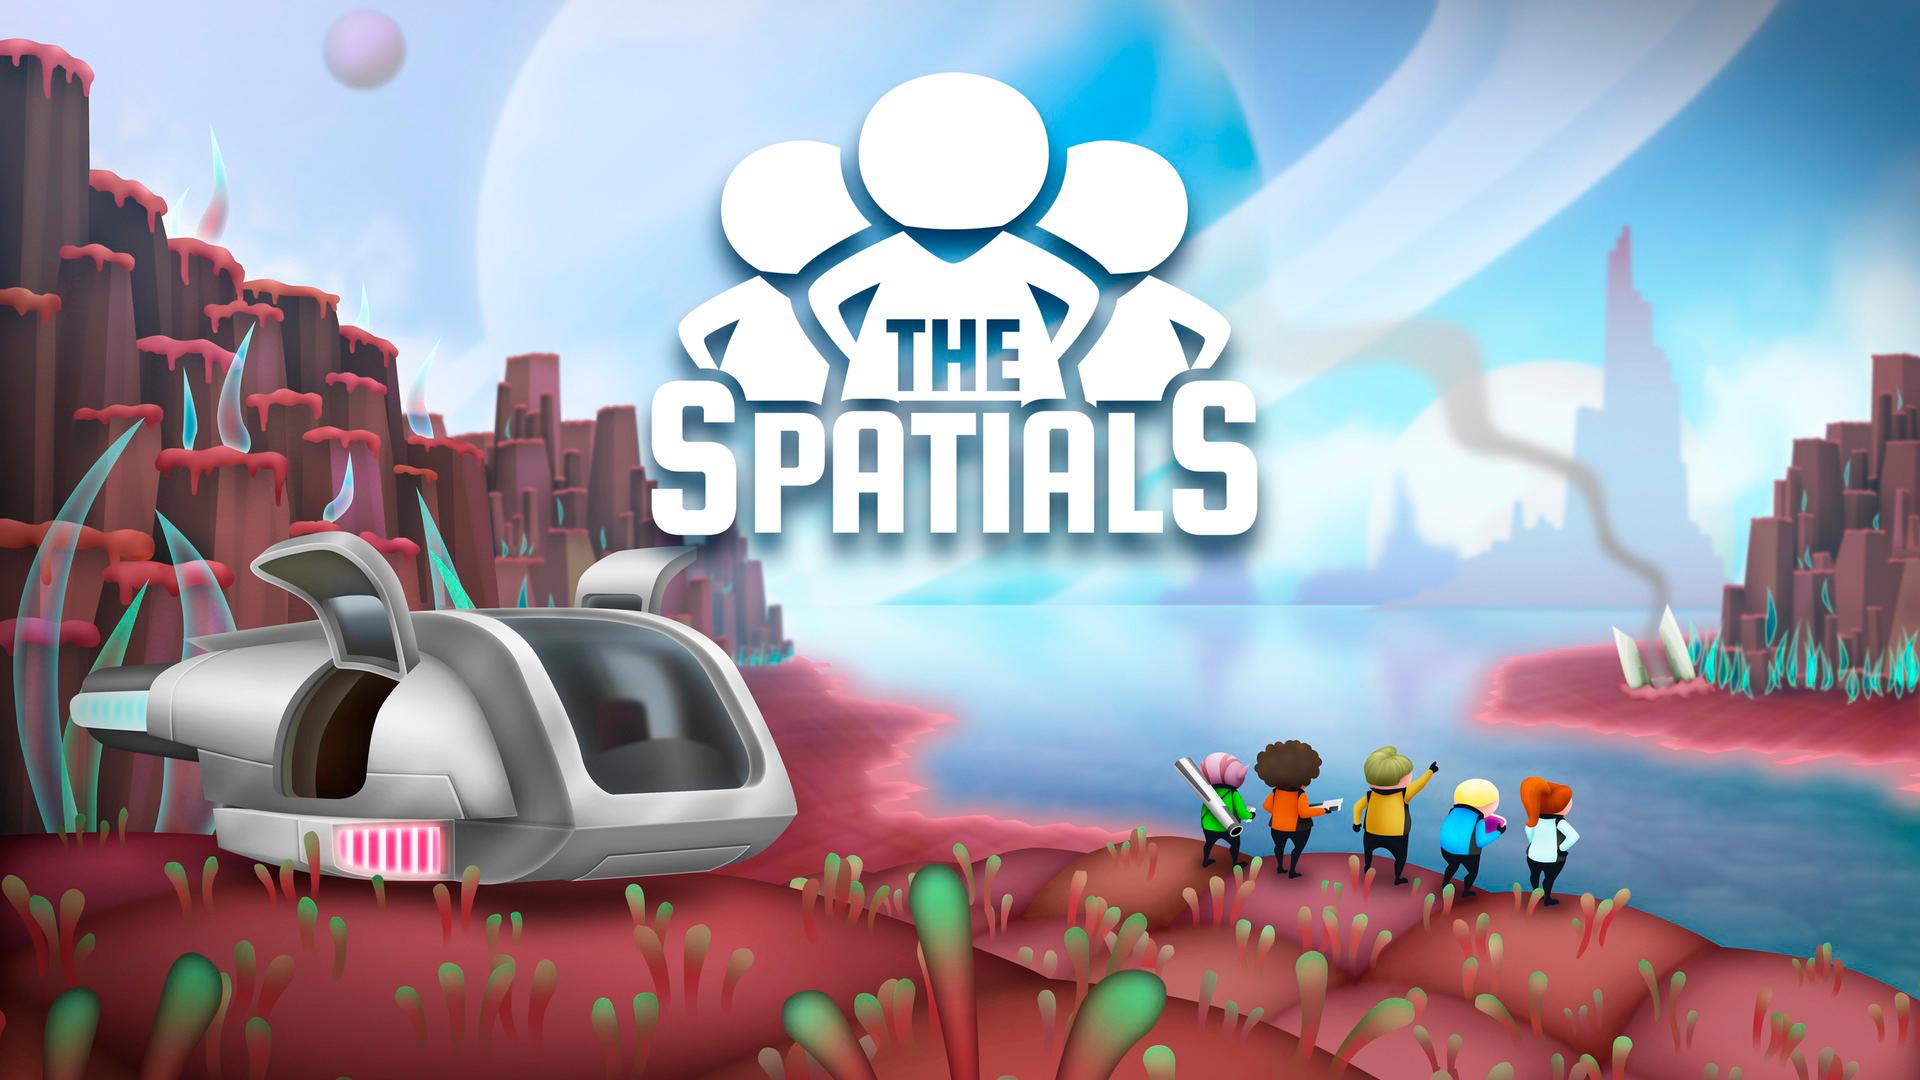 Games We Missed: The Spatials